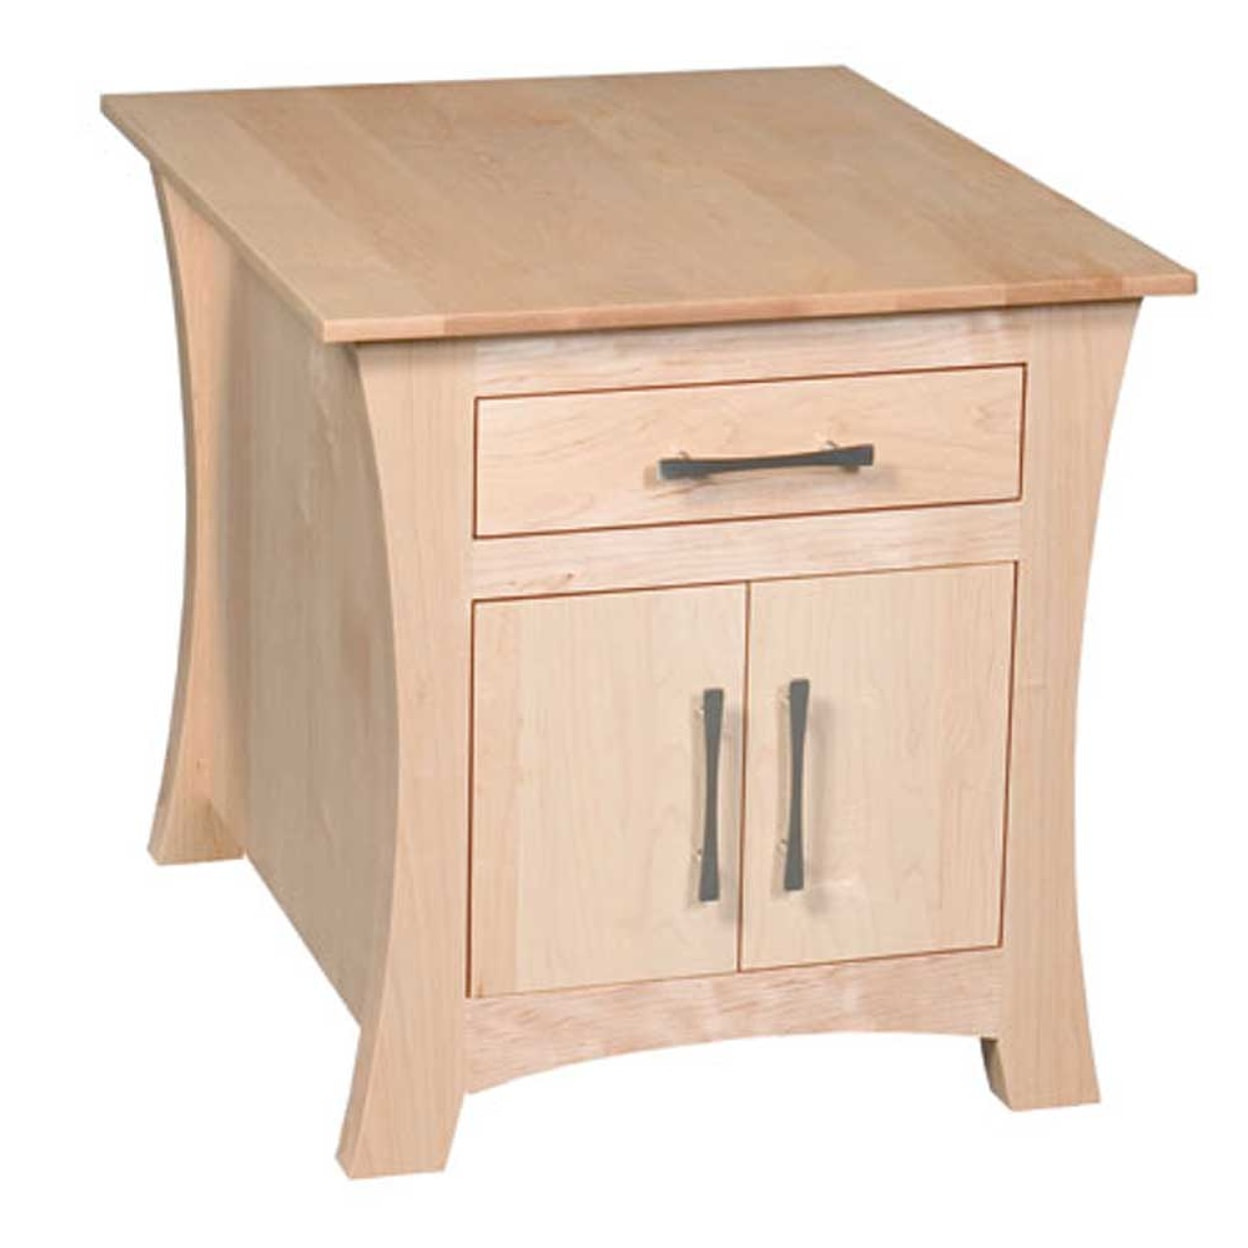 Simply Amish Loft Cabinet End Table